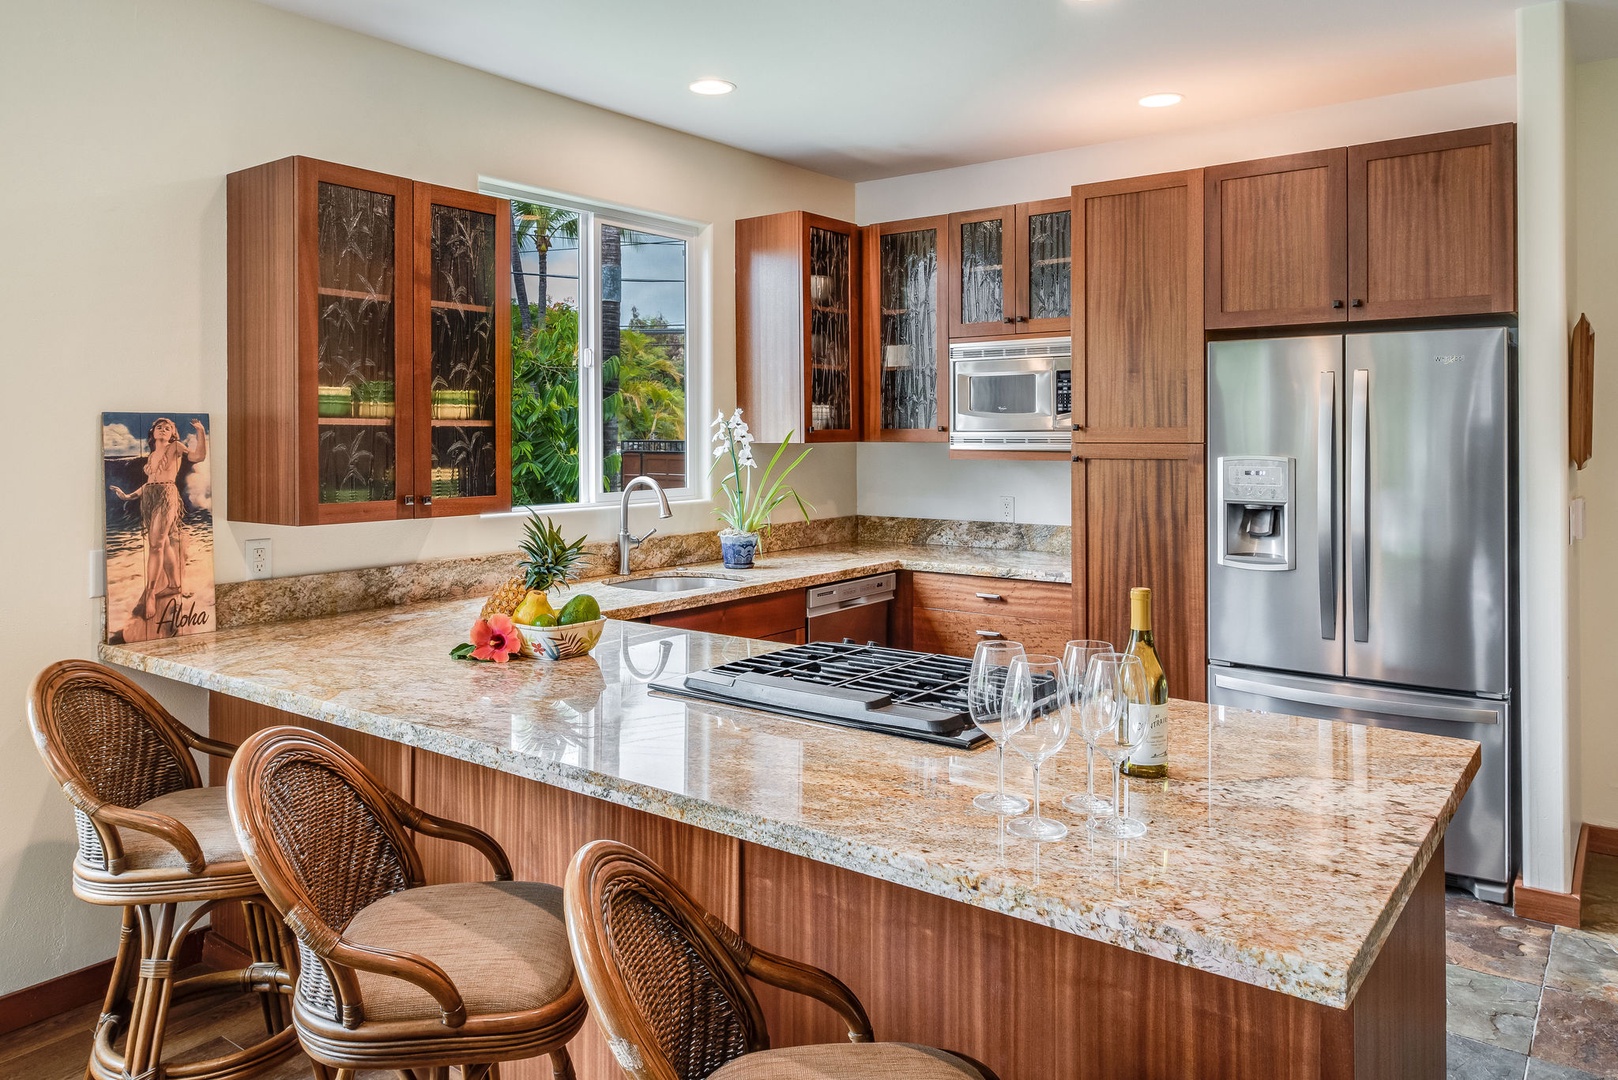 Kailua Kona Vacation Rentals, Kona Beach Bungalows** - Savor the fusion of function and style in the Honu kitchen, boasting expansive countertops and top-tier appliances.